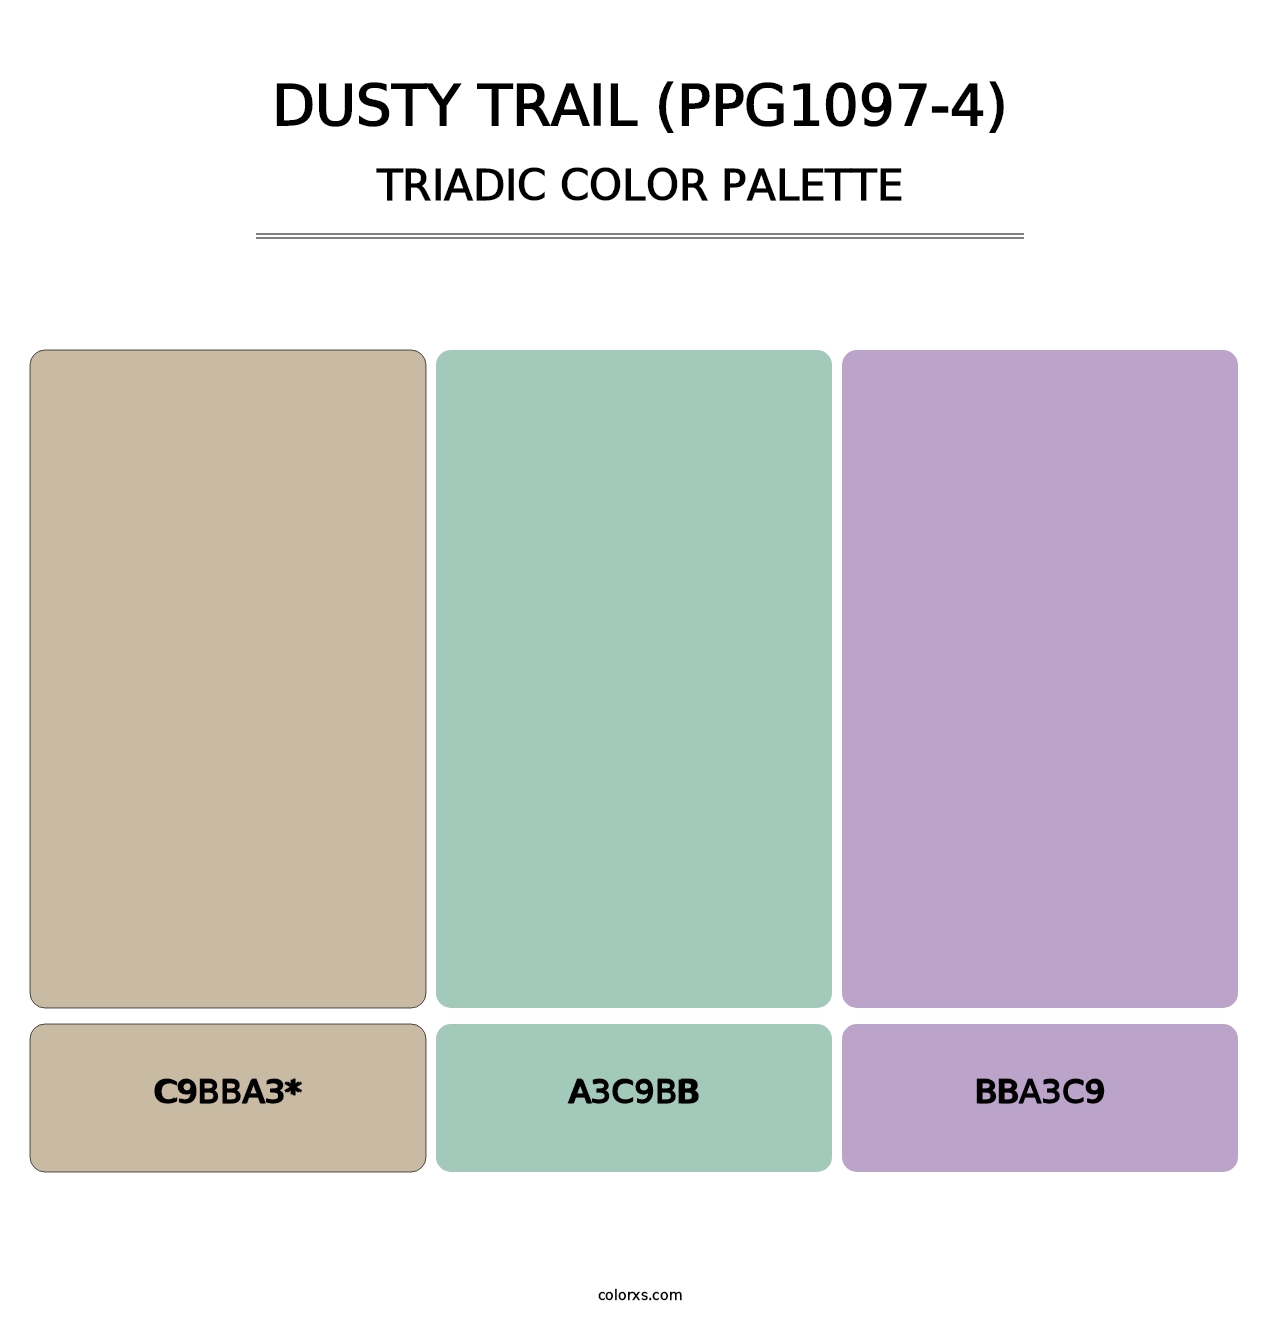 Dusty Trail (PPG1097-4) - Triadic Color Palette